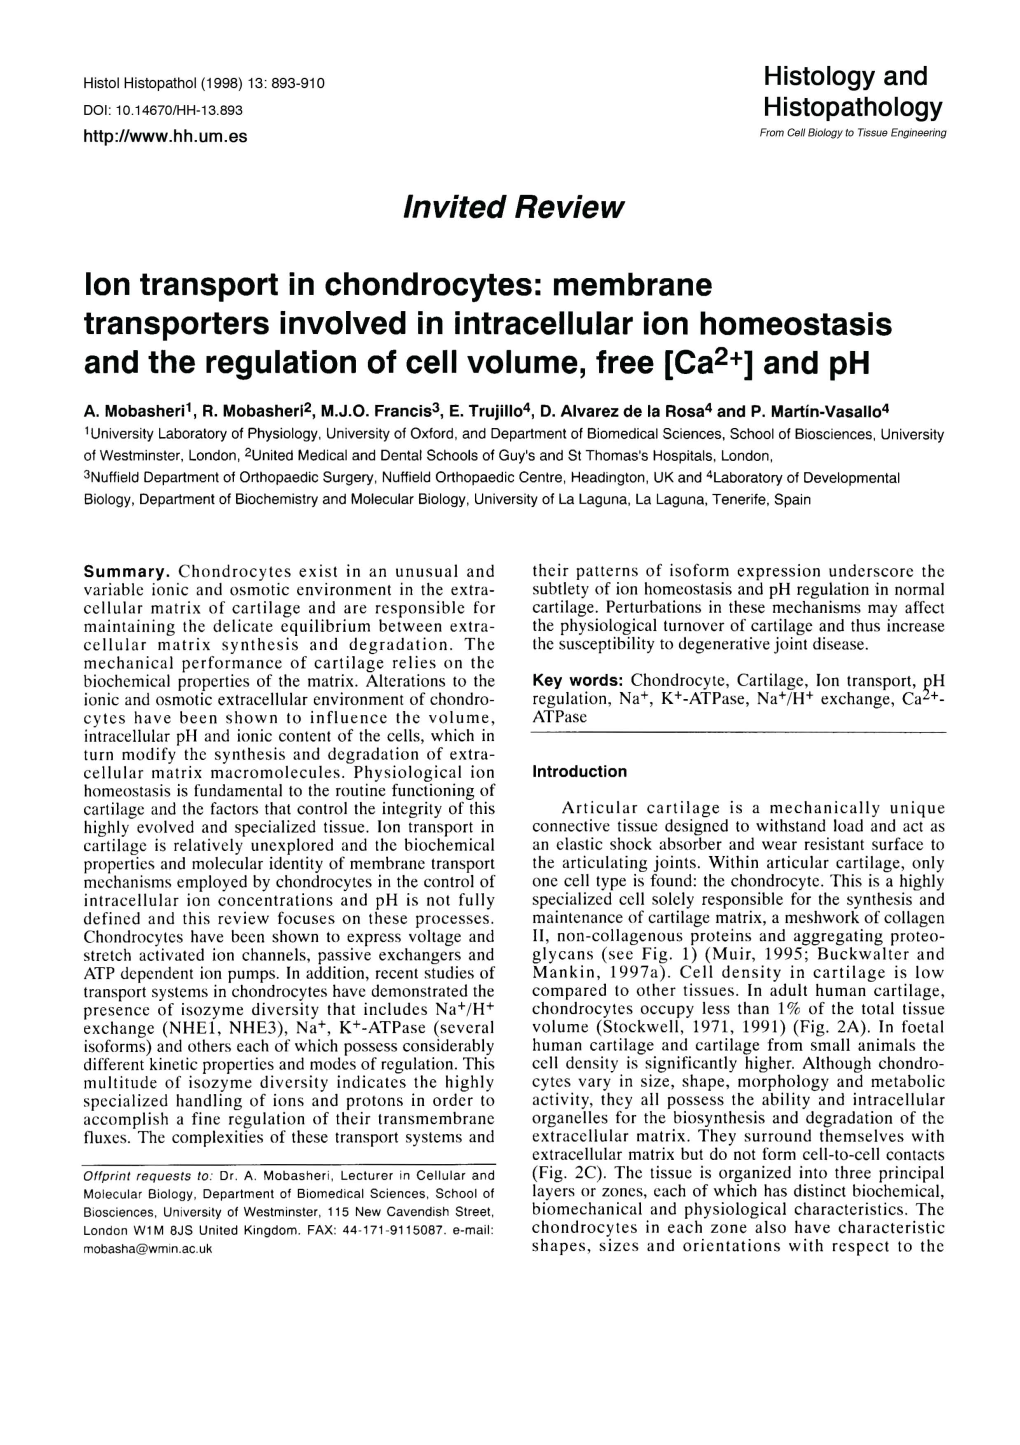 Invited Review Ion Transport in Chondrocytes: Membrane